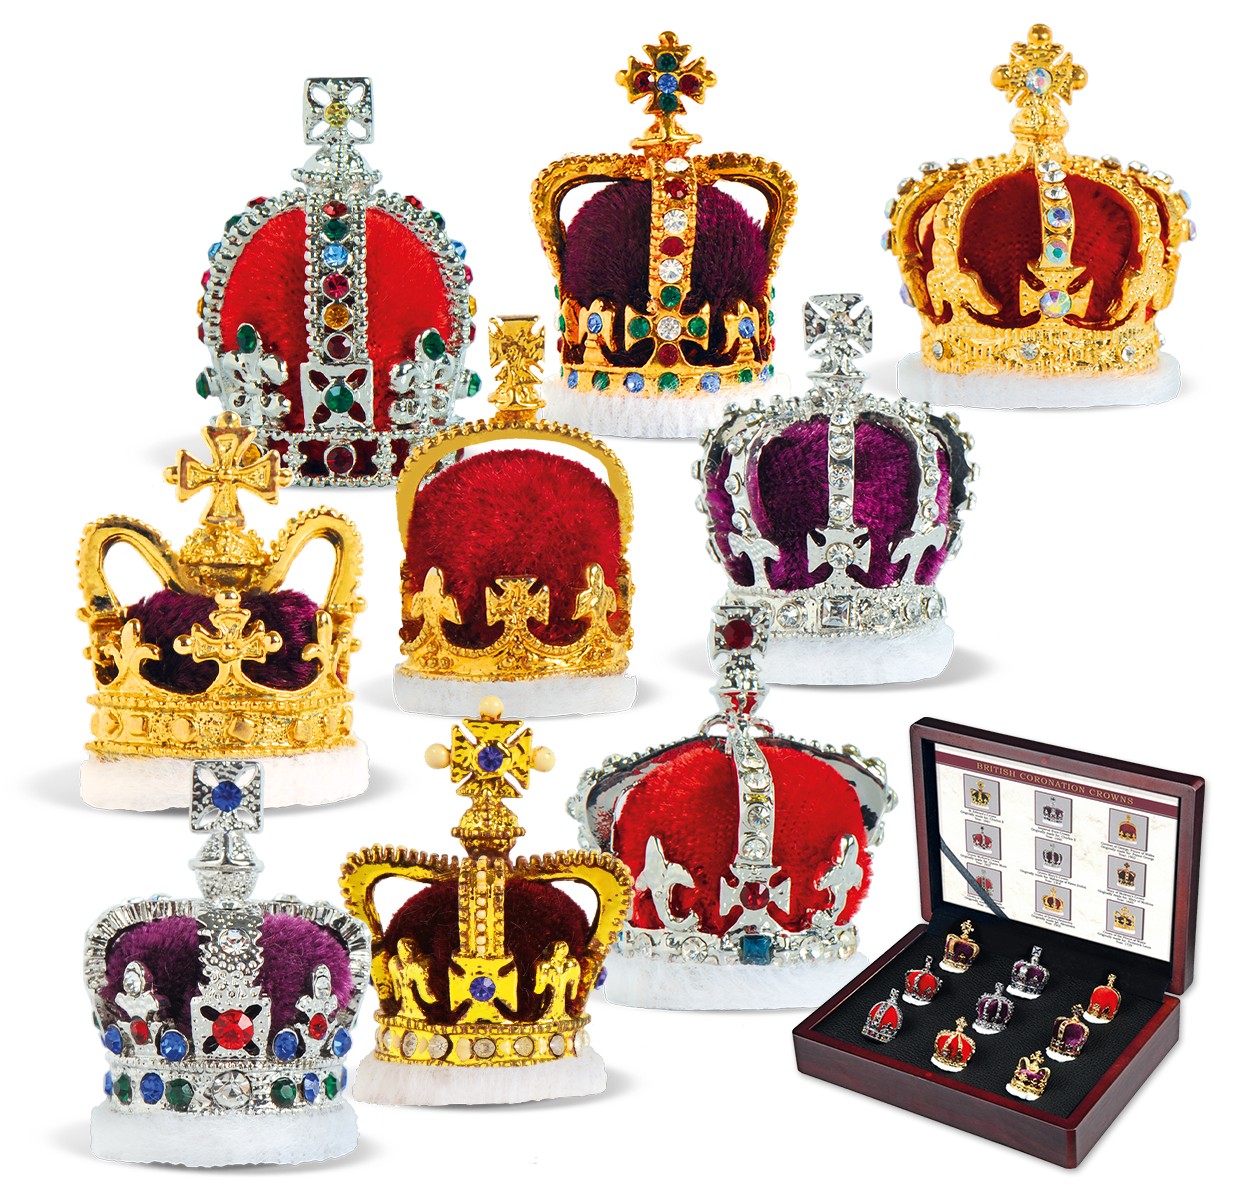 The 'British Coronation Crowns' Set Kings and Queens Royal